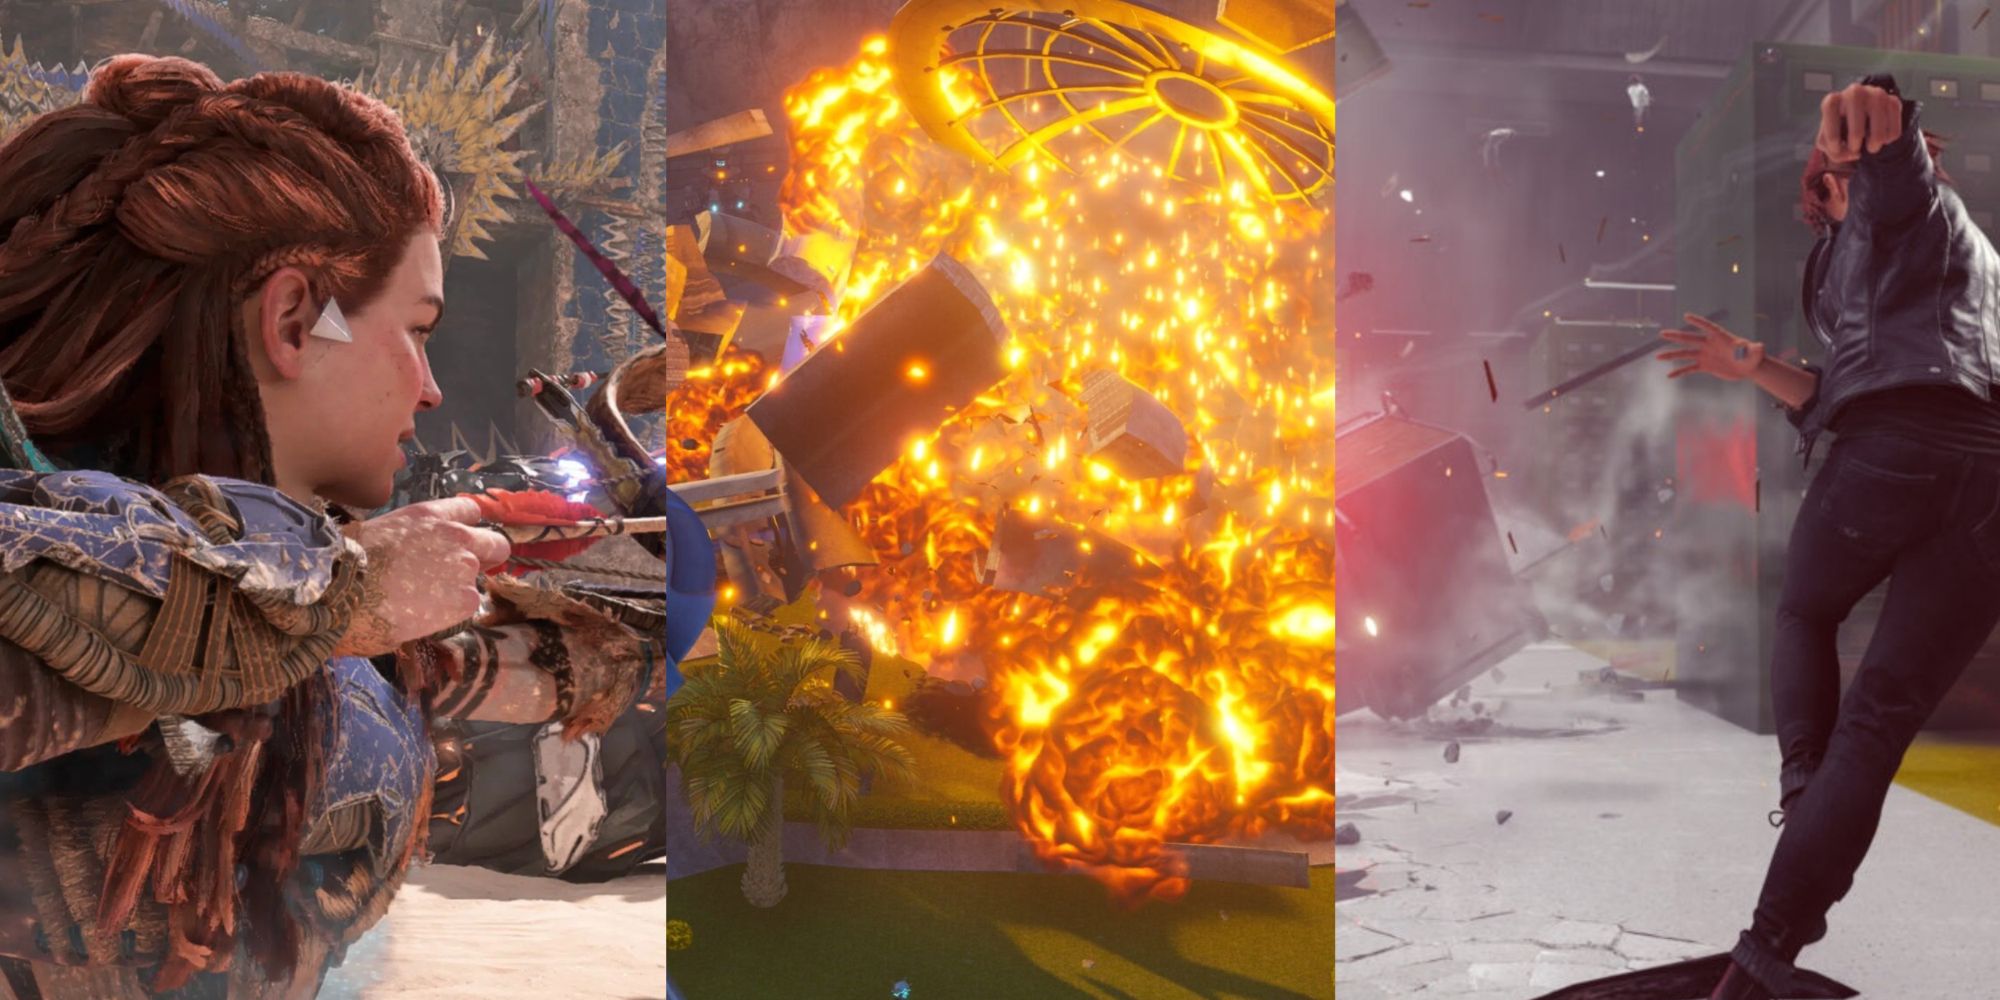 Alloy shooting a machine, building exploding in Destroy All Humans, and Jesse running in Control